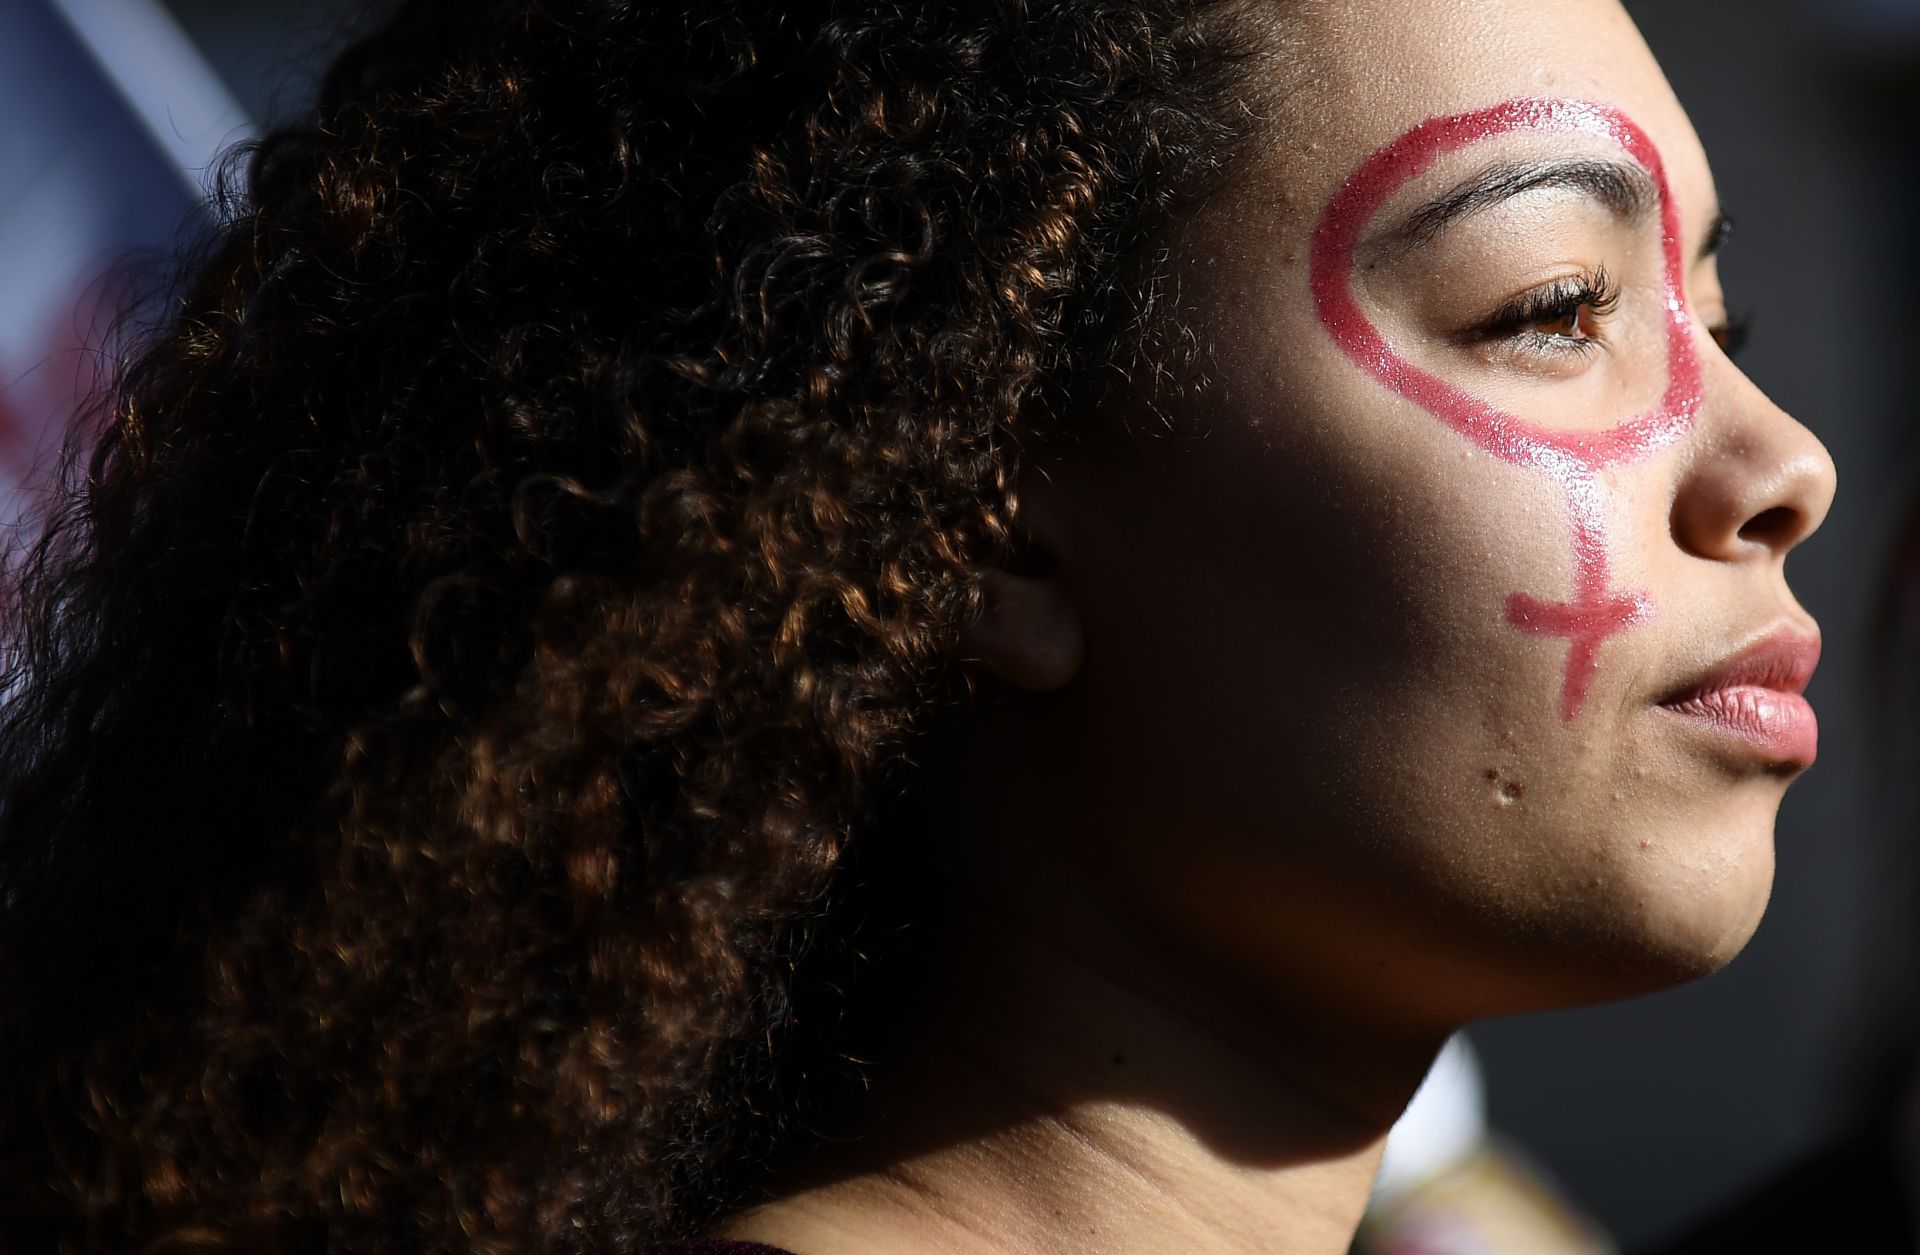 A woman with the female gender pictogram made up on her face attends a demonstration as part of the 40th International Women's Day on March 8, 2017 in Marseille.